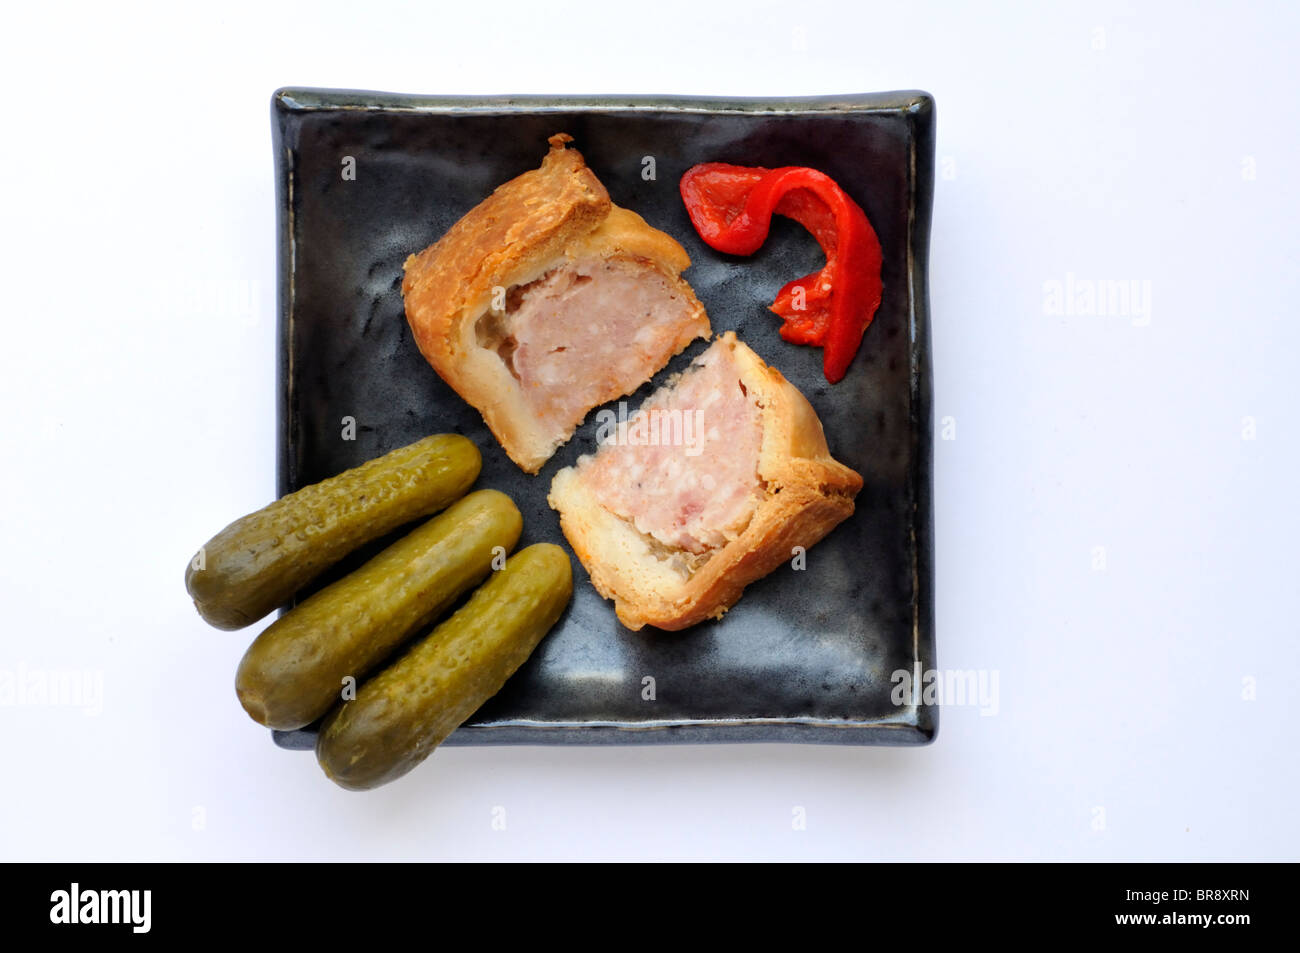 Two wedges of common British pork pie with miniature gherkins and roasted red peppers. Stock Photo